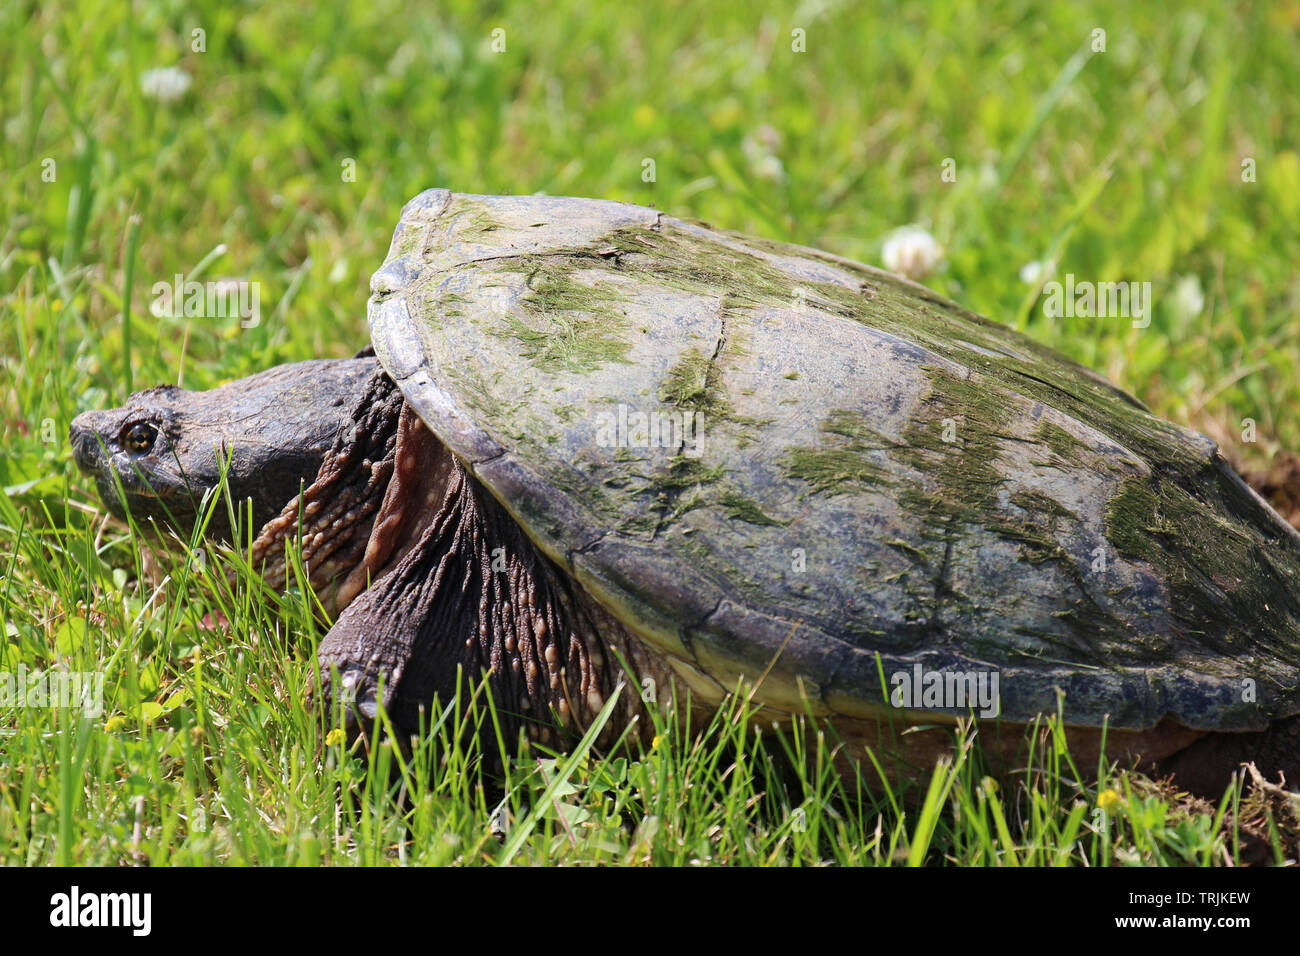 Close up, side view, of a large Common Snapping Turtle laying in the grass in Trevor, Wisconsin, USA, in the spring, laying eggs Stock Photo